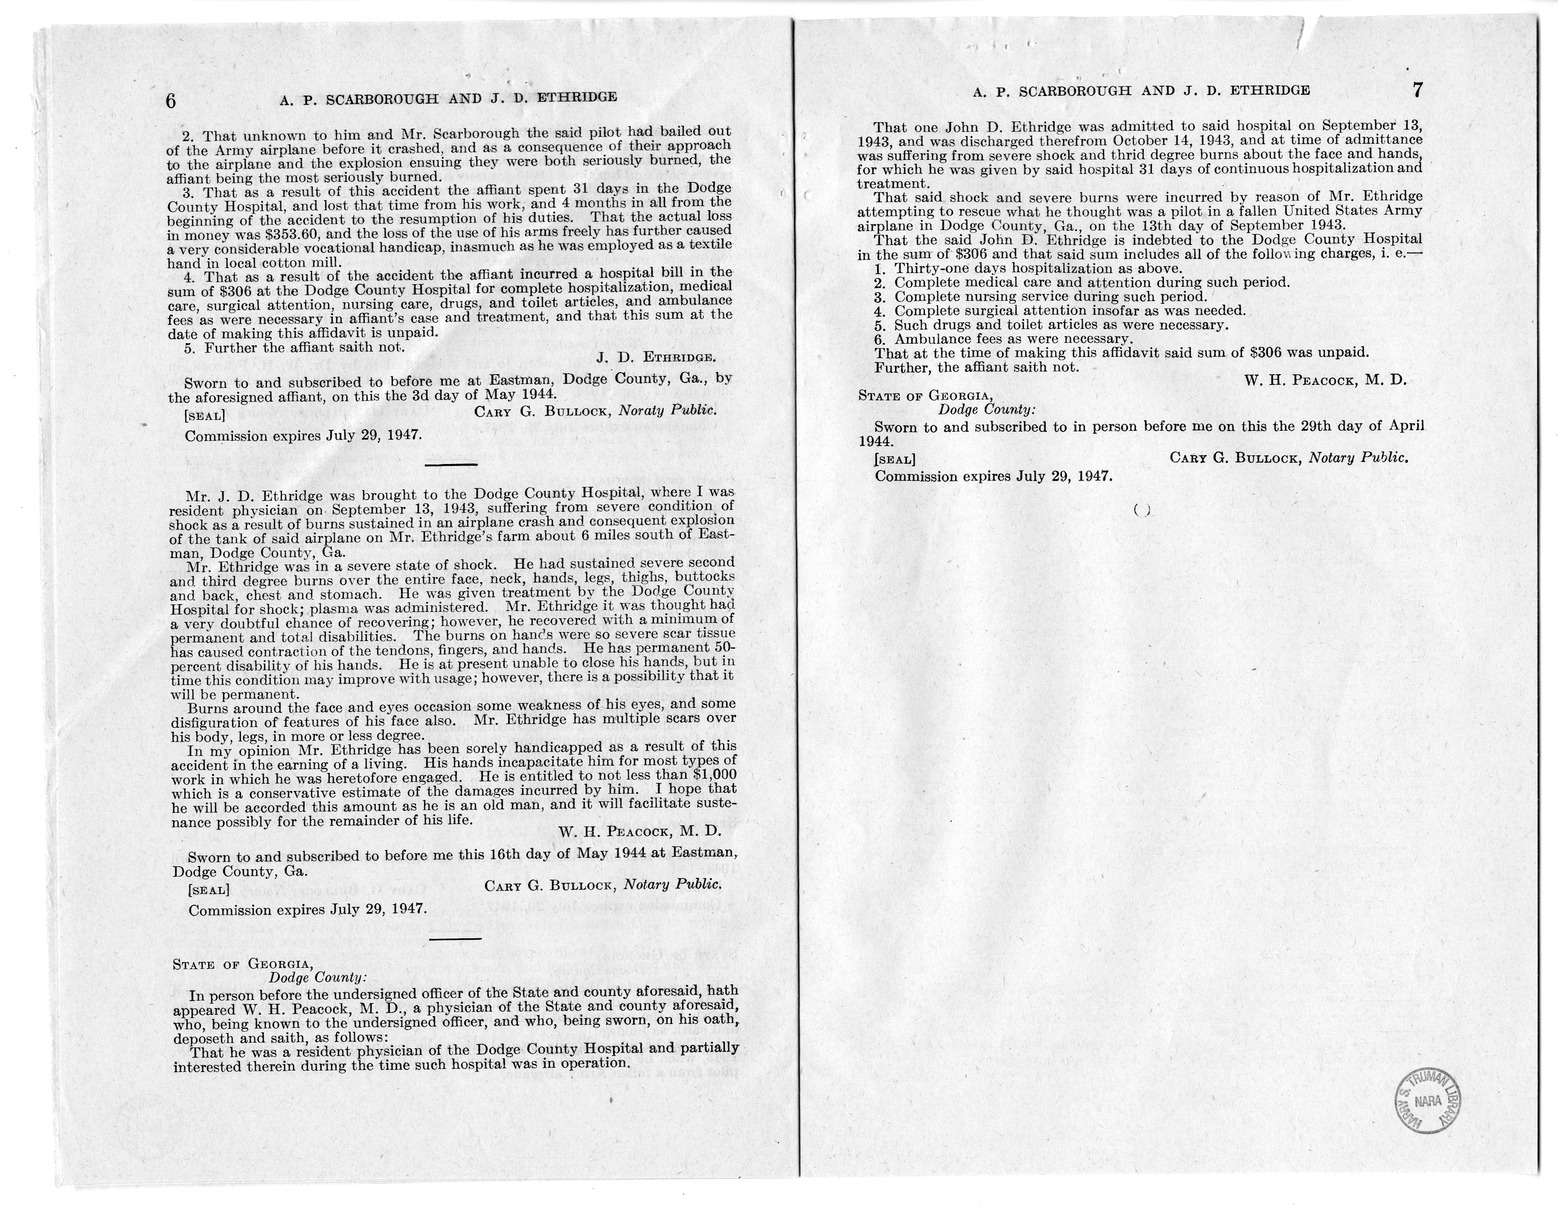 Memorandum from Frederick J. Bailey to M. C. Latta, H.R. 1012, For the Relief of A. P. Scarborough and J. D. Ethridge, with Attachments